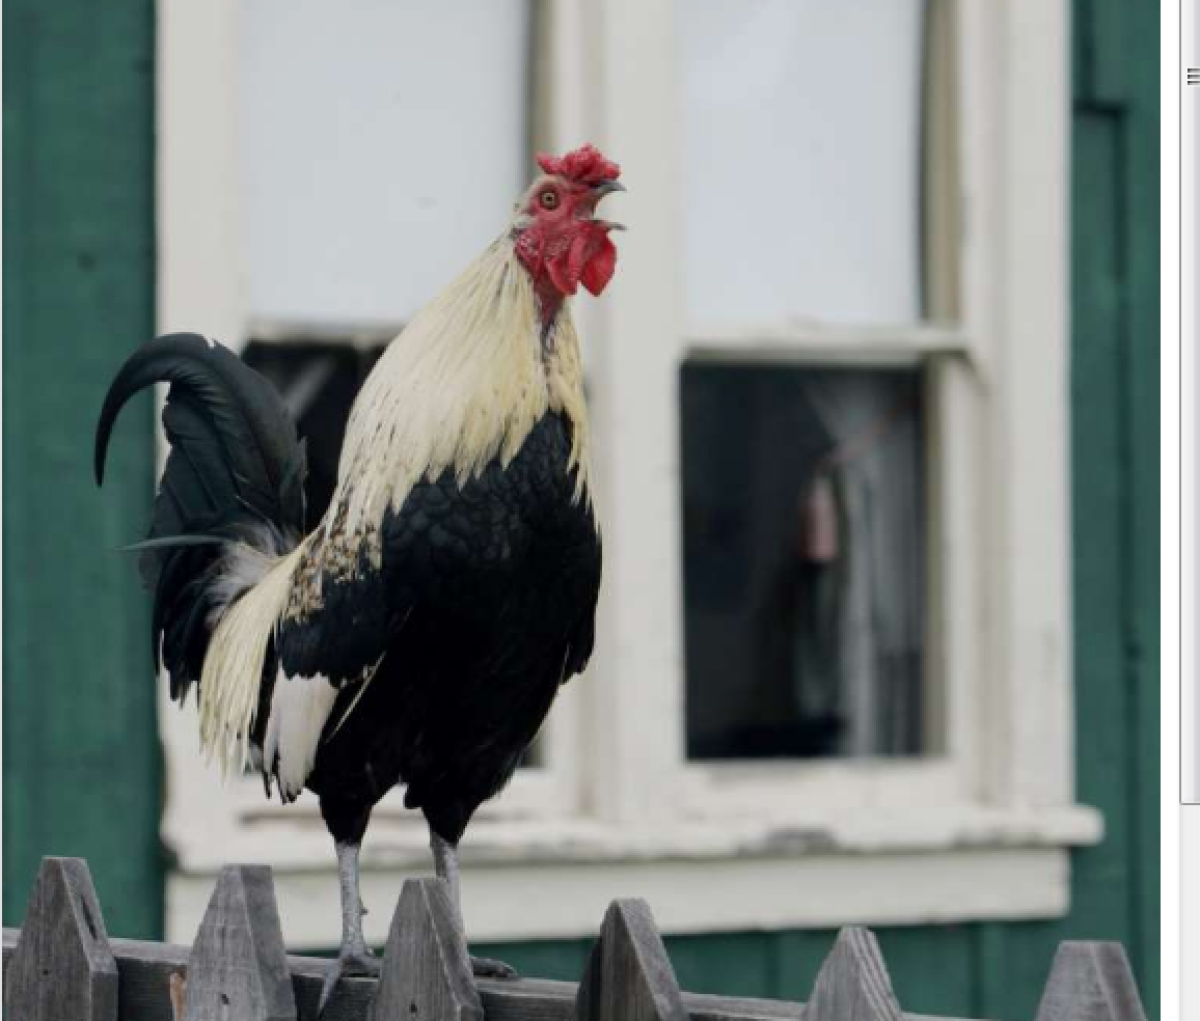 Scientists would like to figure out why roosters crow at dawn.